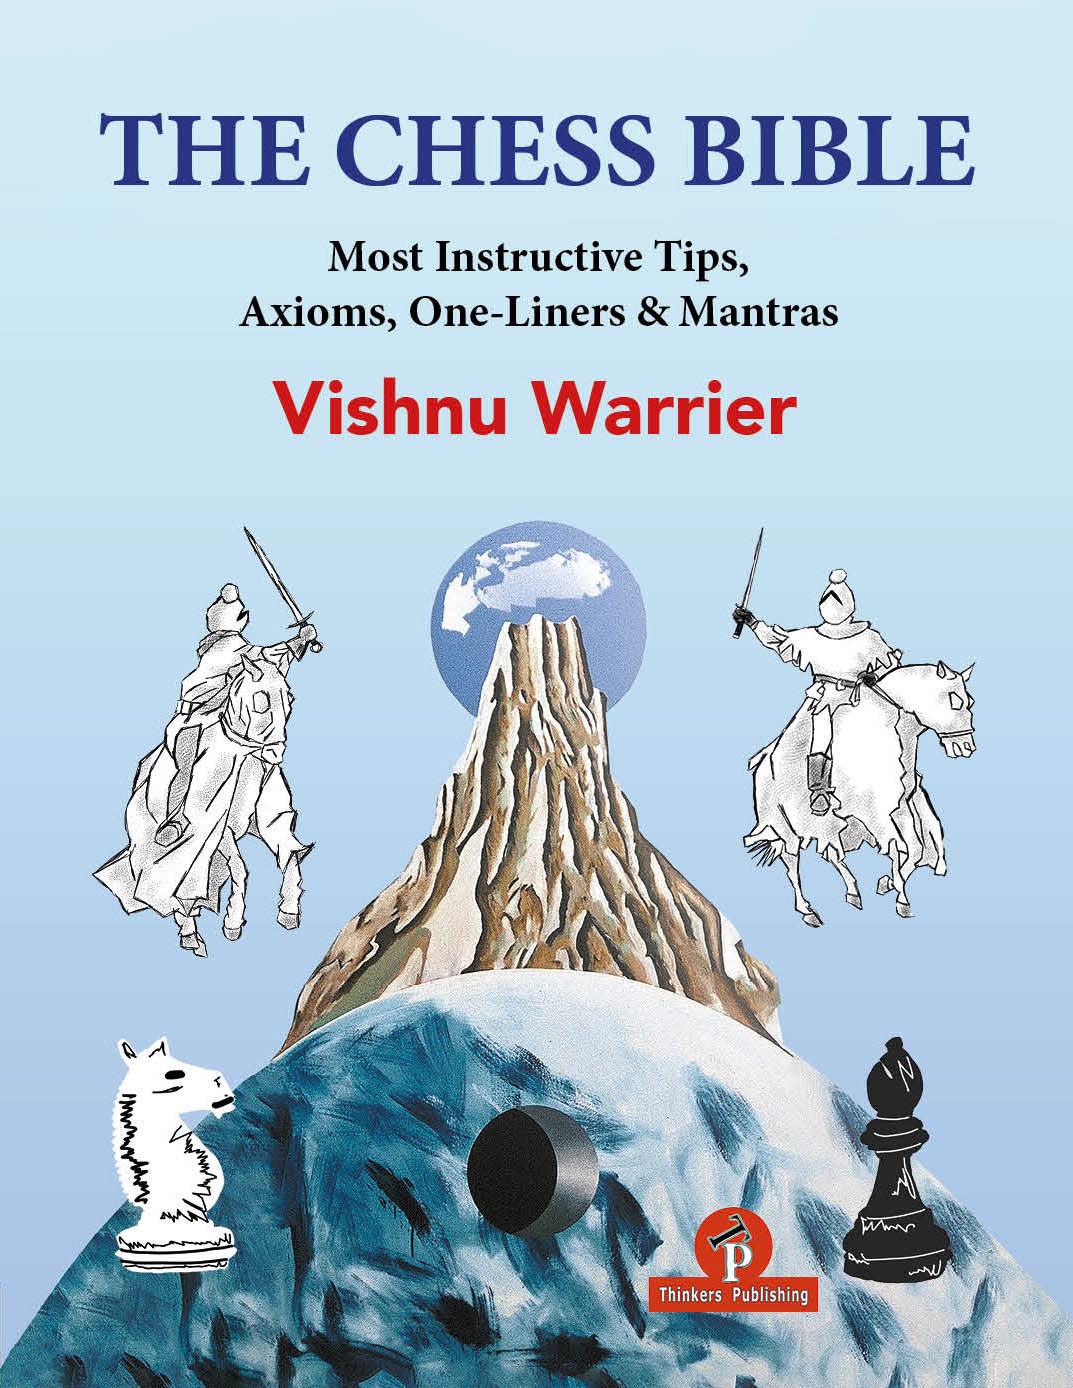 The Chess Bible – Most Instructive Tips, Axioms, One-Liners & Mantras